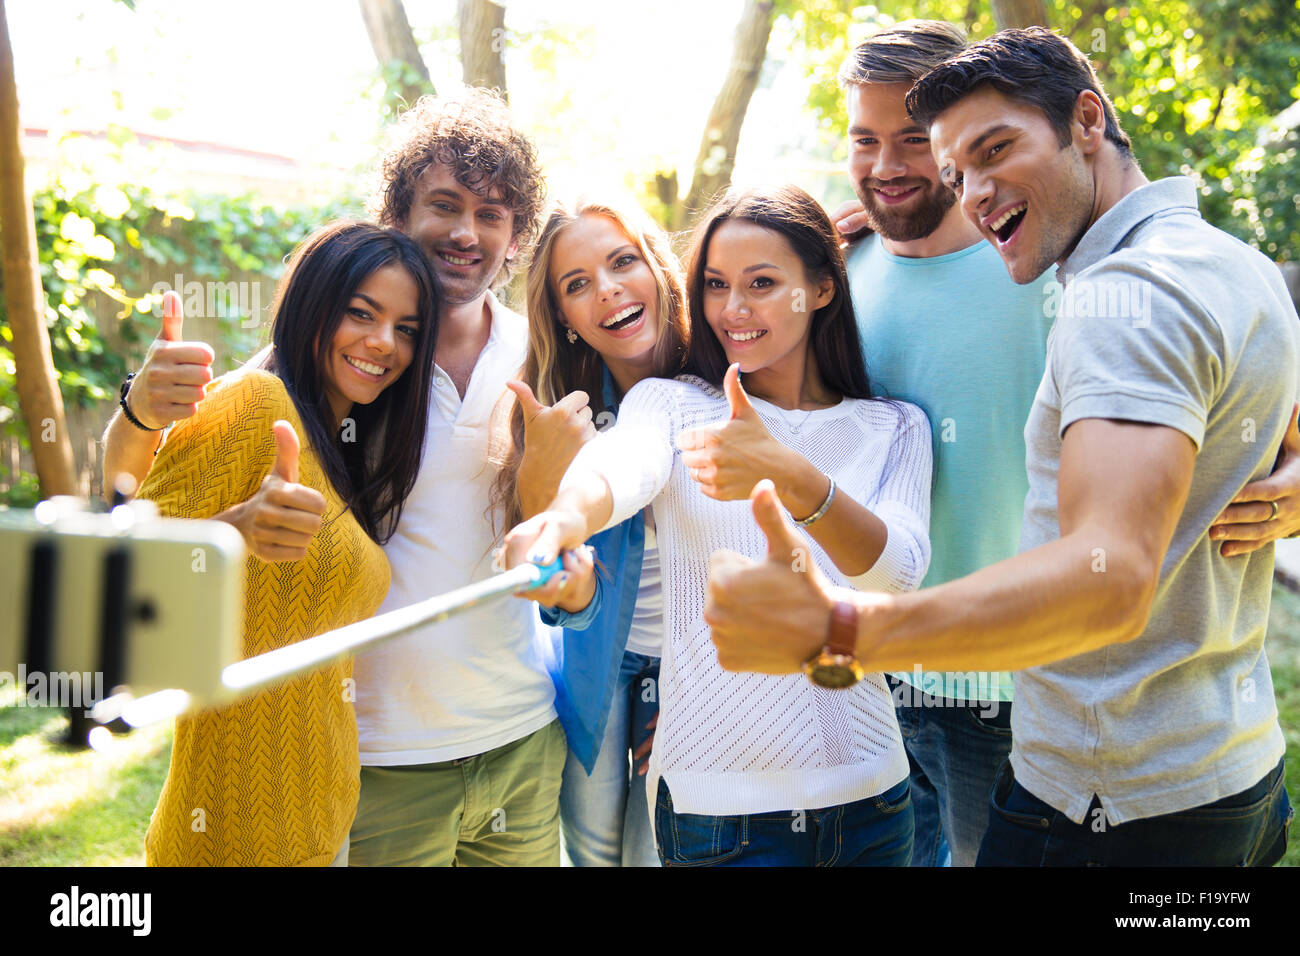 Happy friends making selfie photo on smartphone while showing thumbs up outdoors Stock Photo